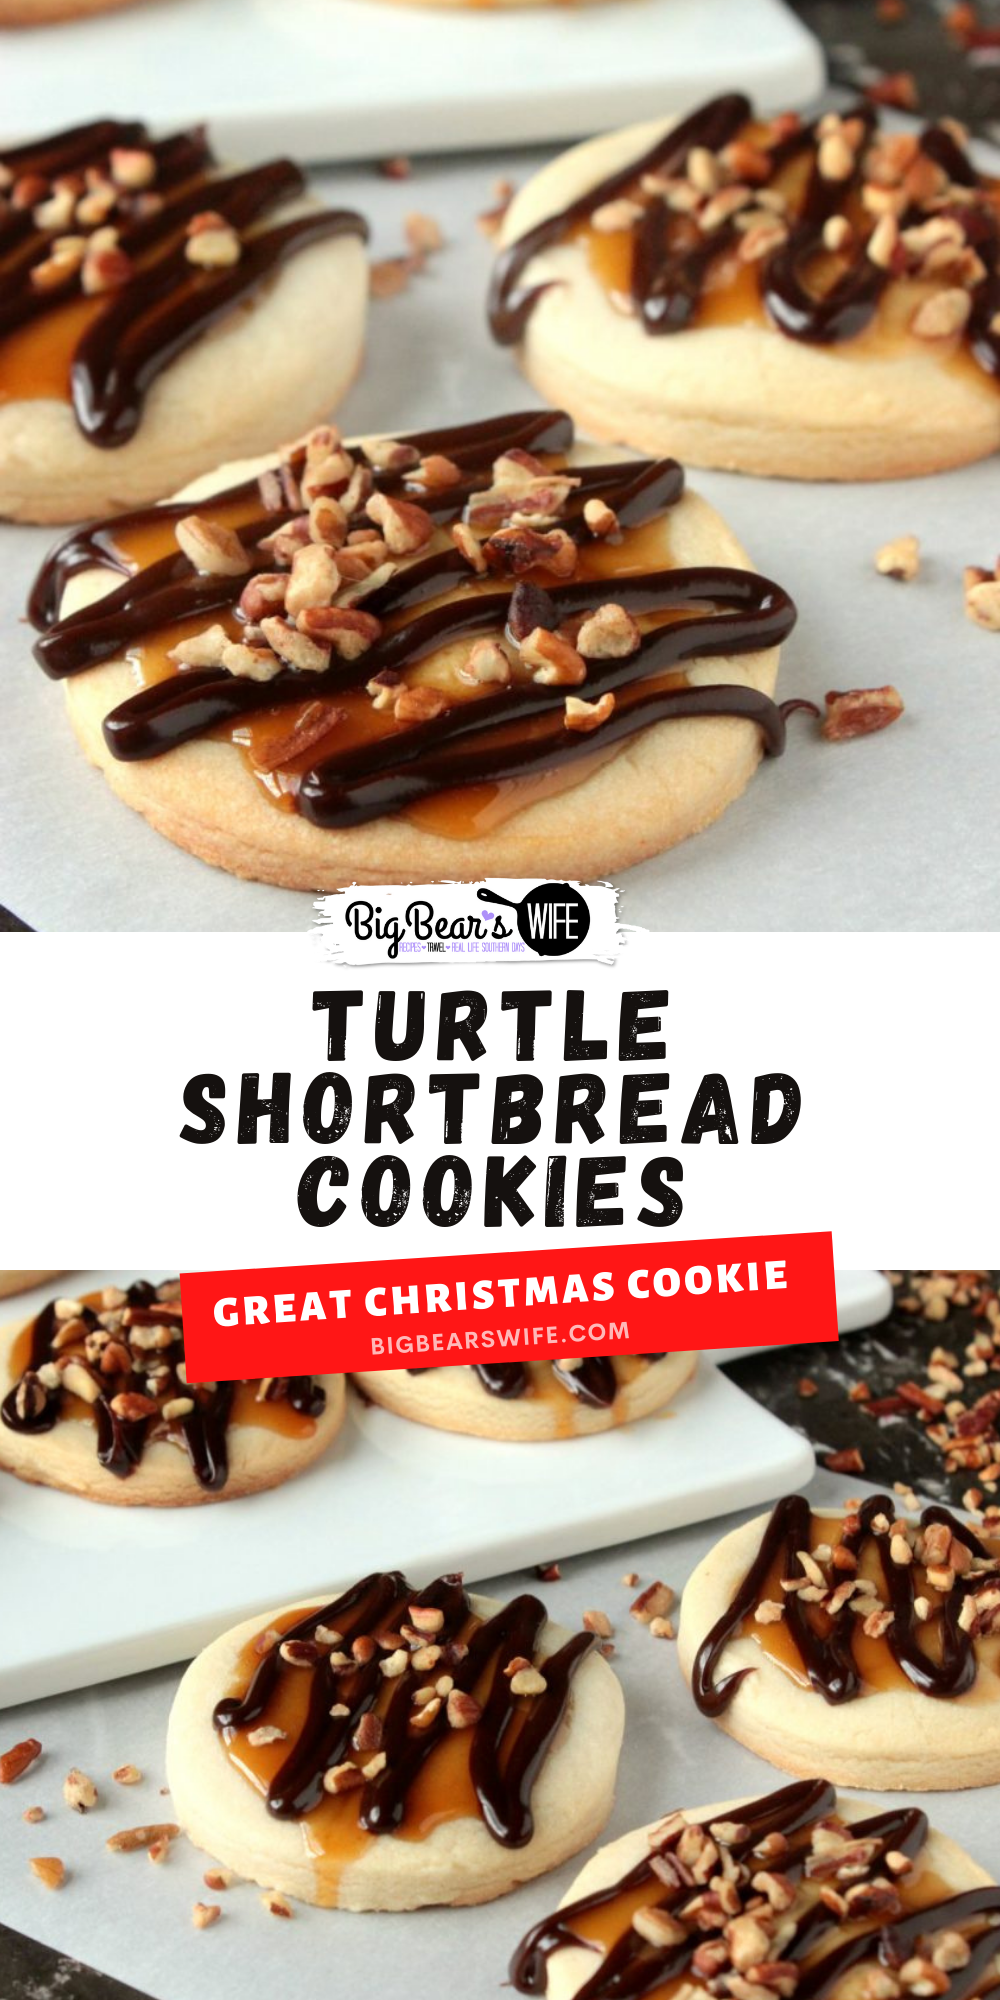 Turtle Shortbread Cookies - These Turtle Shortbread Cookies are homemade shortbread cookies have a caramel sauce center, they’re drizzled with homemade chocolate sauce and topped with chopped pecans! via @bigbearswife